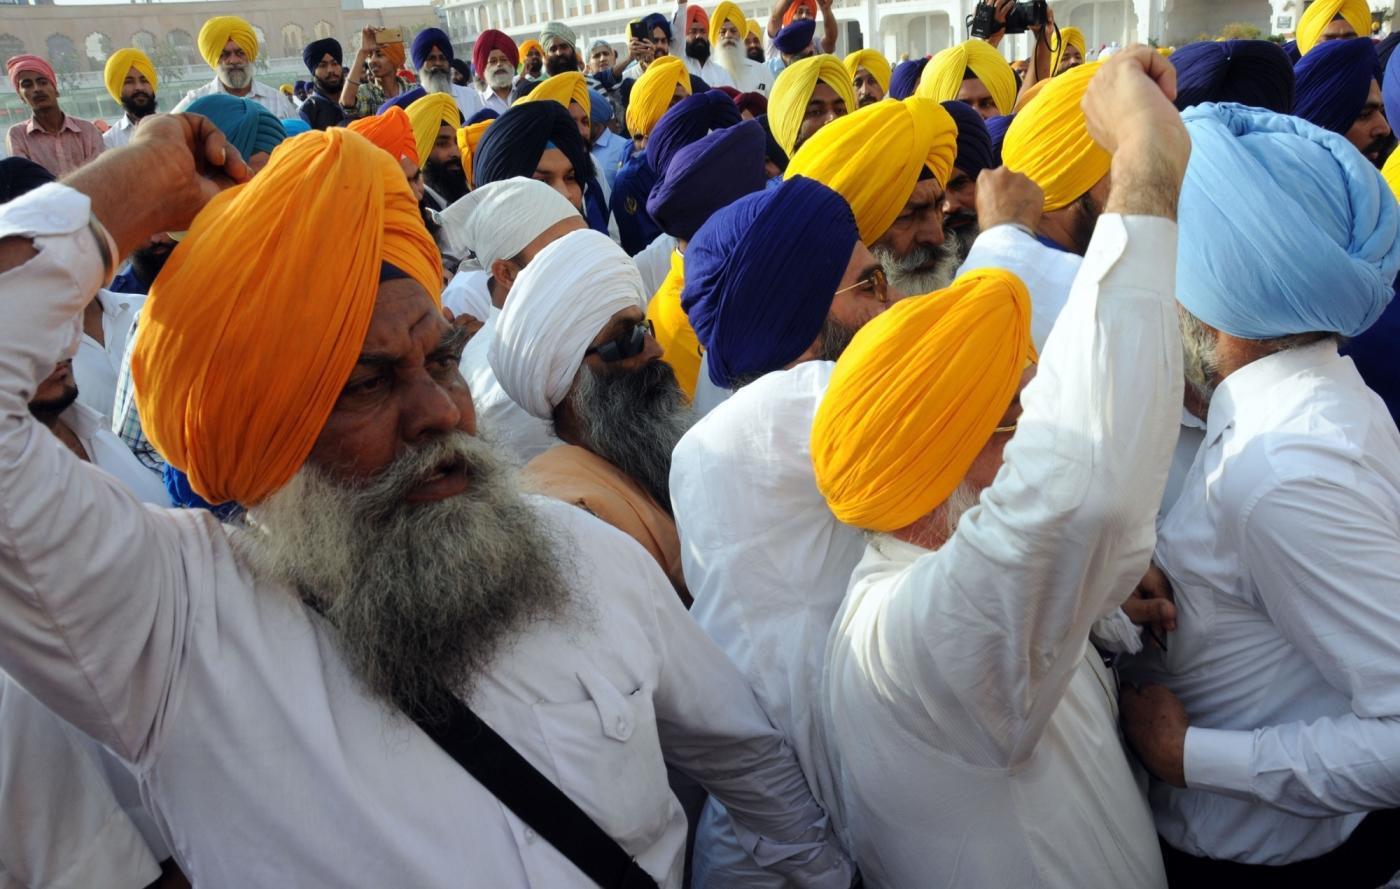 Amritsar: Sikh radicals shout pro-Khalistan slogans outside the venue of a programme organised by Shiromani Gurudwara Parbhandk Committee (SGPC) to felicitate Canadian Defence Minister Harjit Singh Sajjan in Amritsar on April 20, 2017. (Photo: IANS) by . 